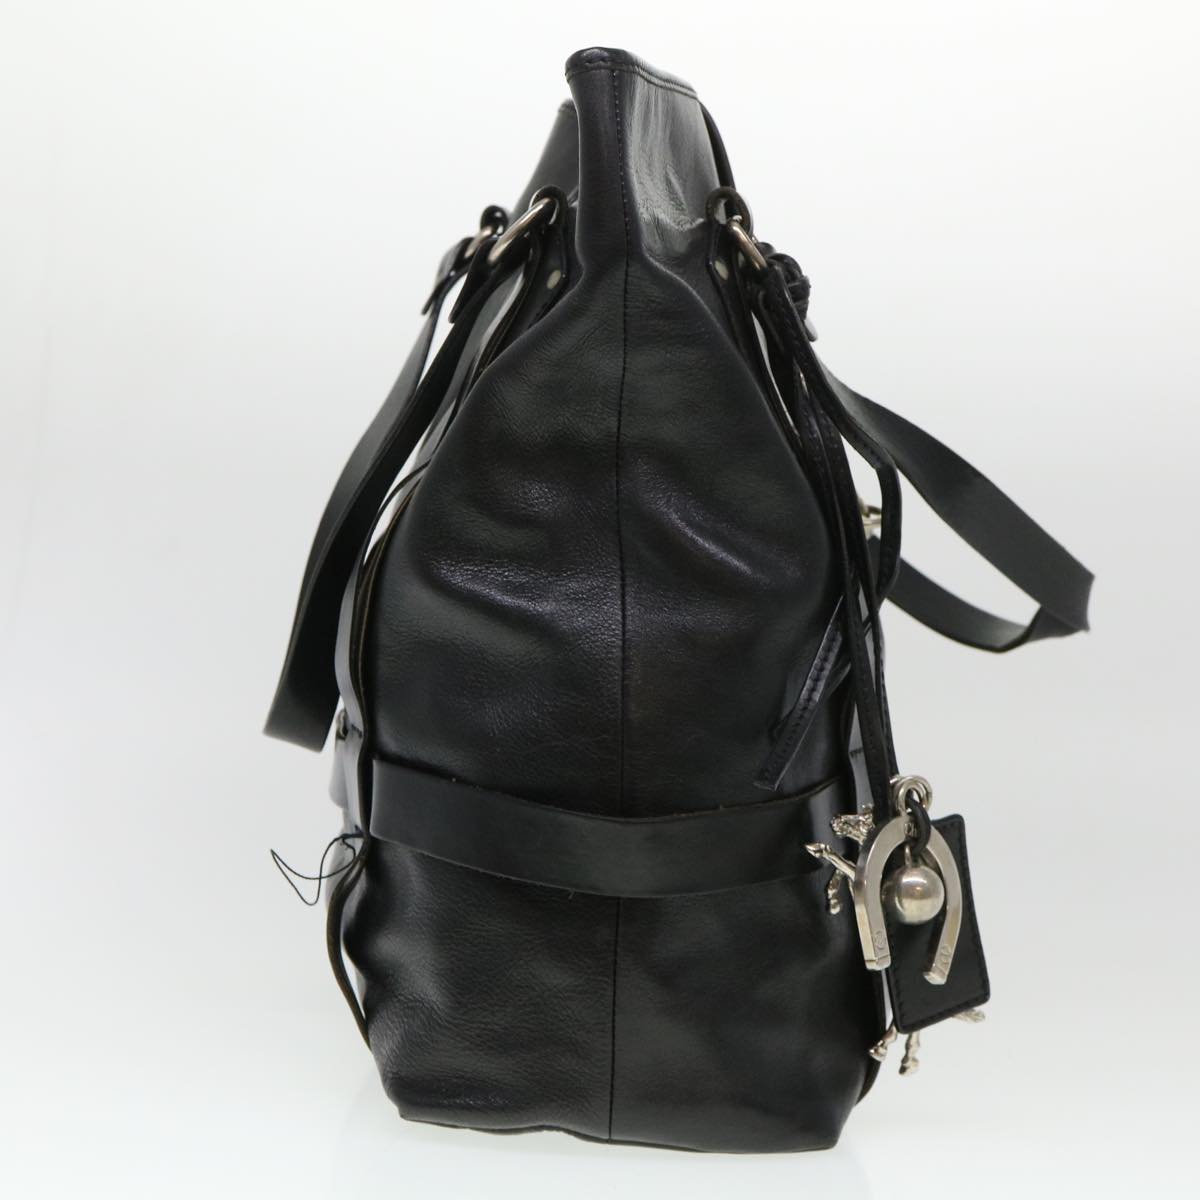 Chloe Tote Bag Leather Black Auth bs4744